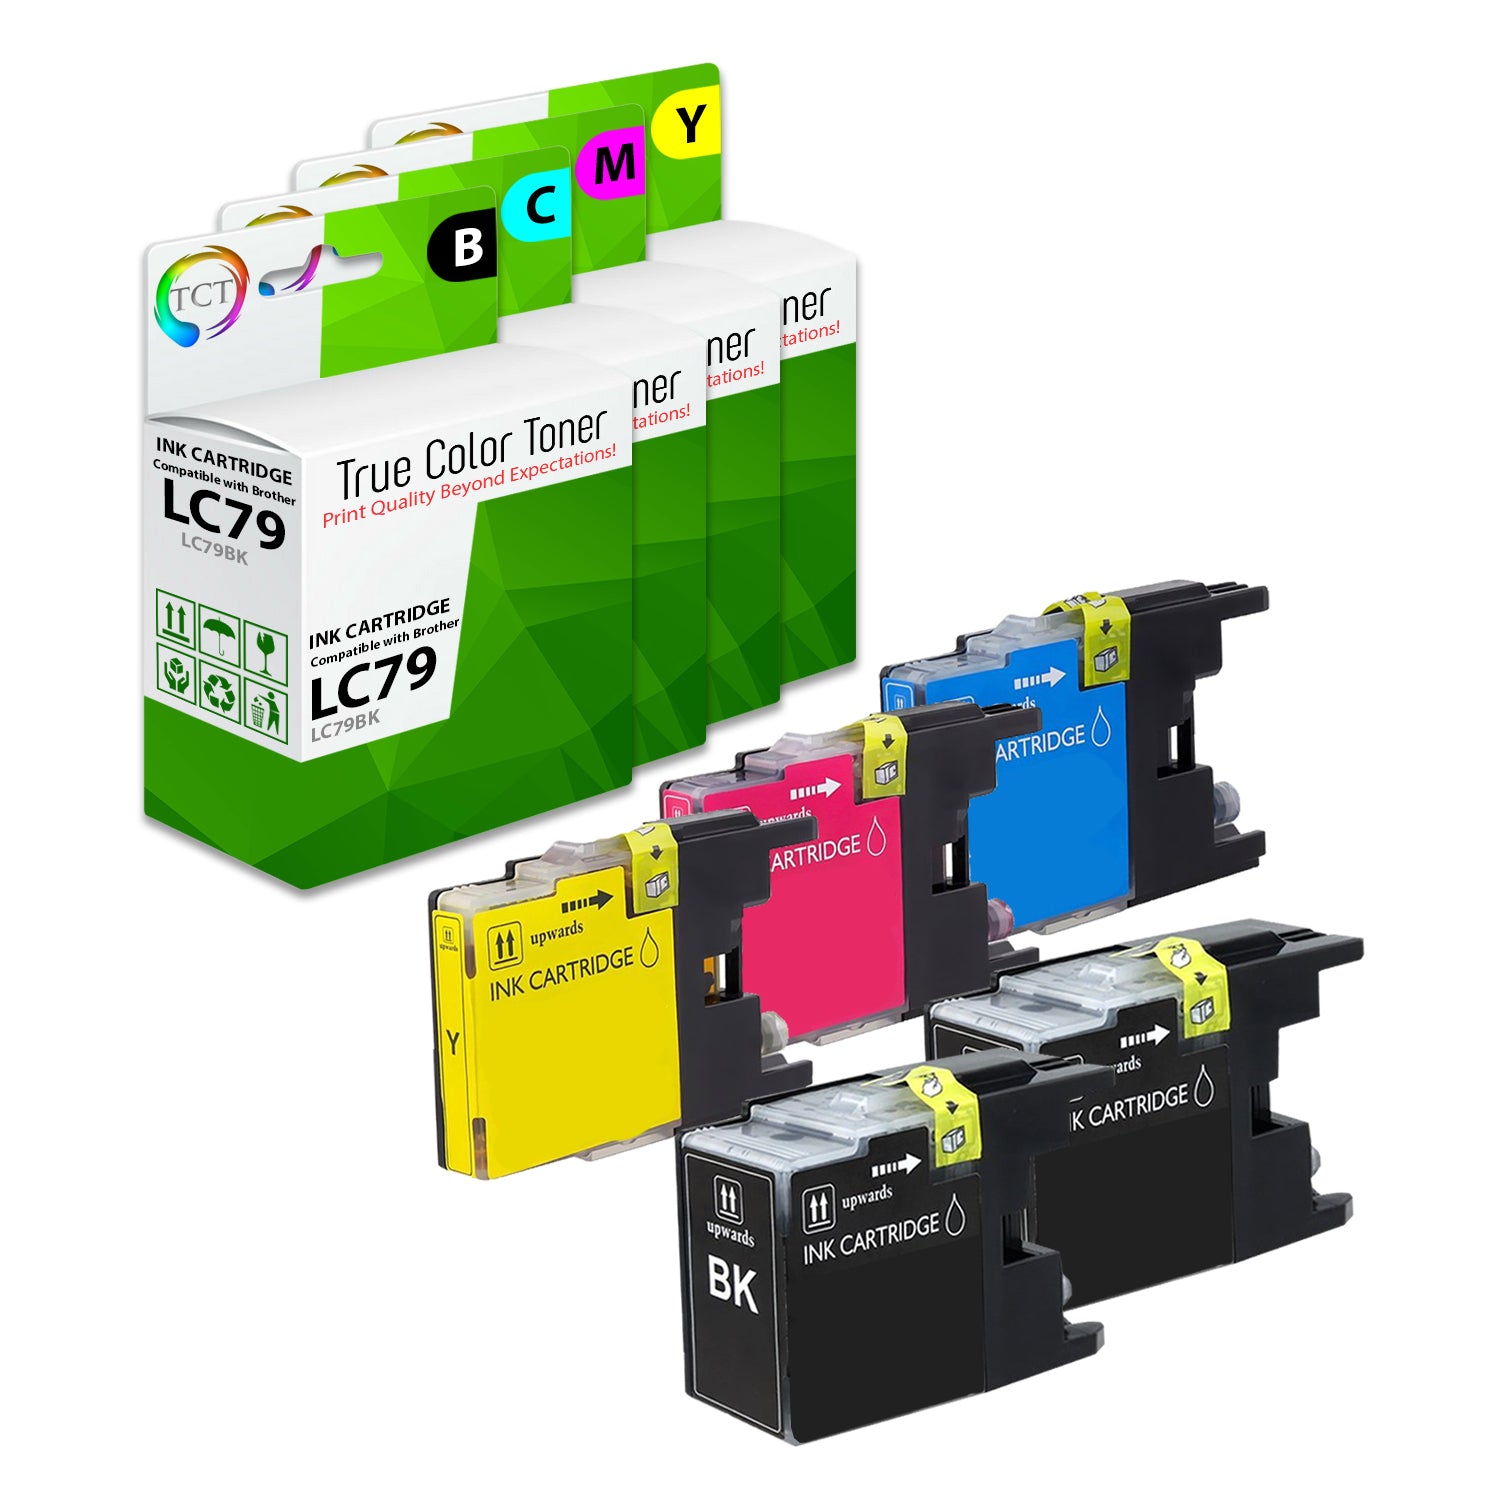 TCT Compatible Super HY Ink Cartridge Replacement for the Brother LC79 Series - 5PK (B, C, M, Y)